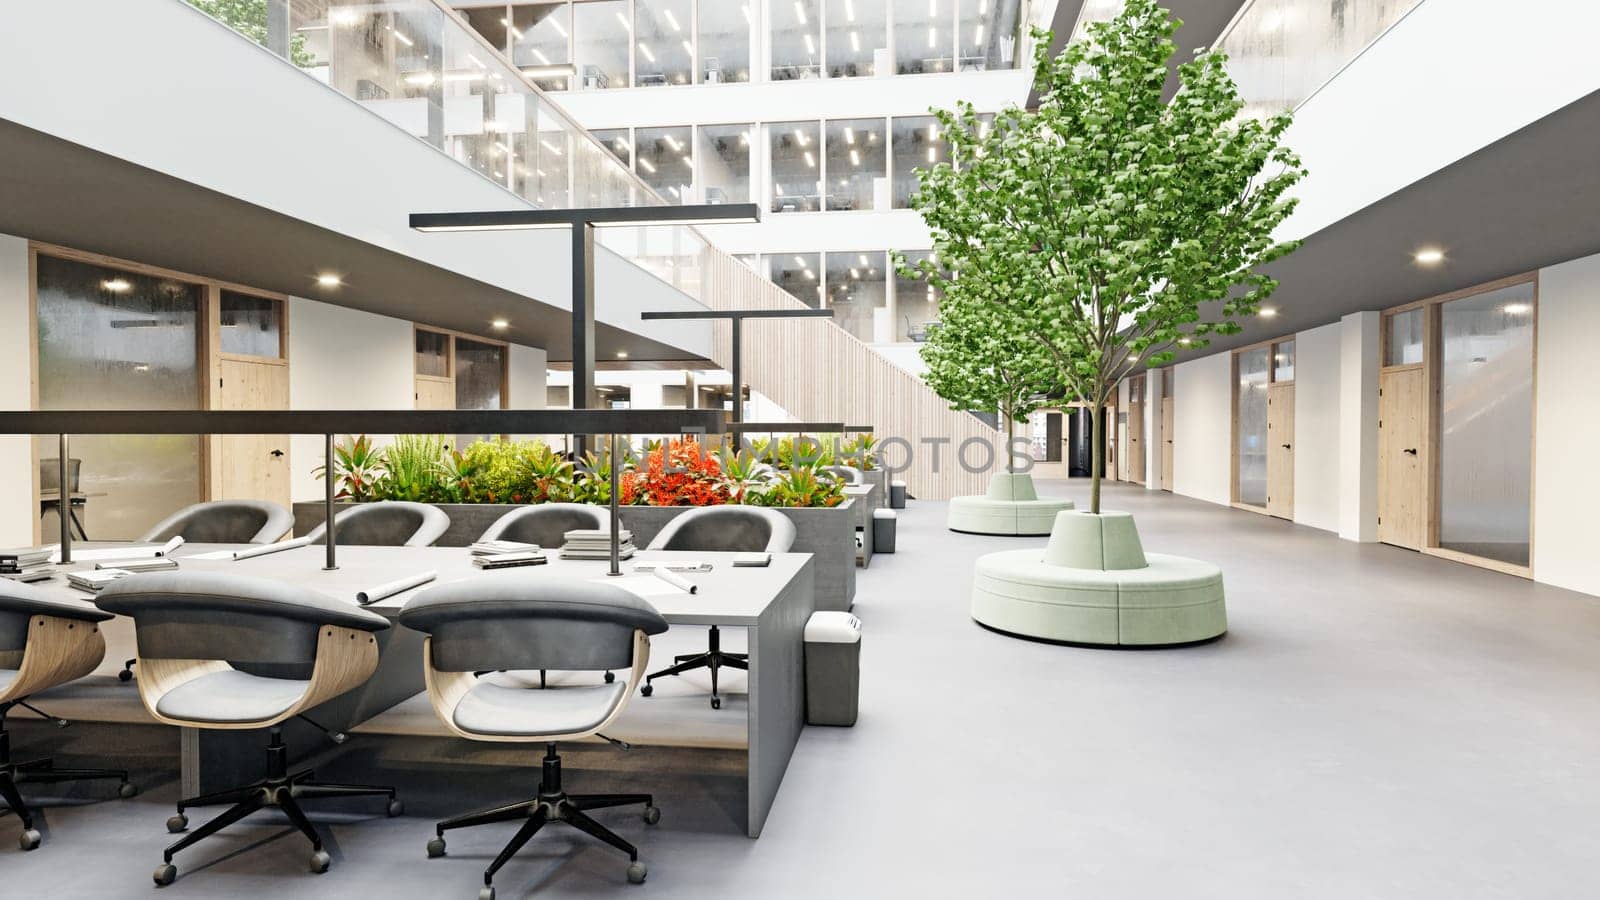 Interior of a modern office building. 3d rendering mock up